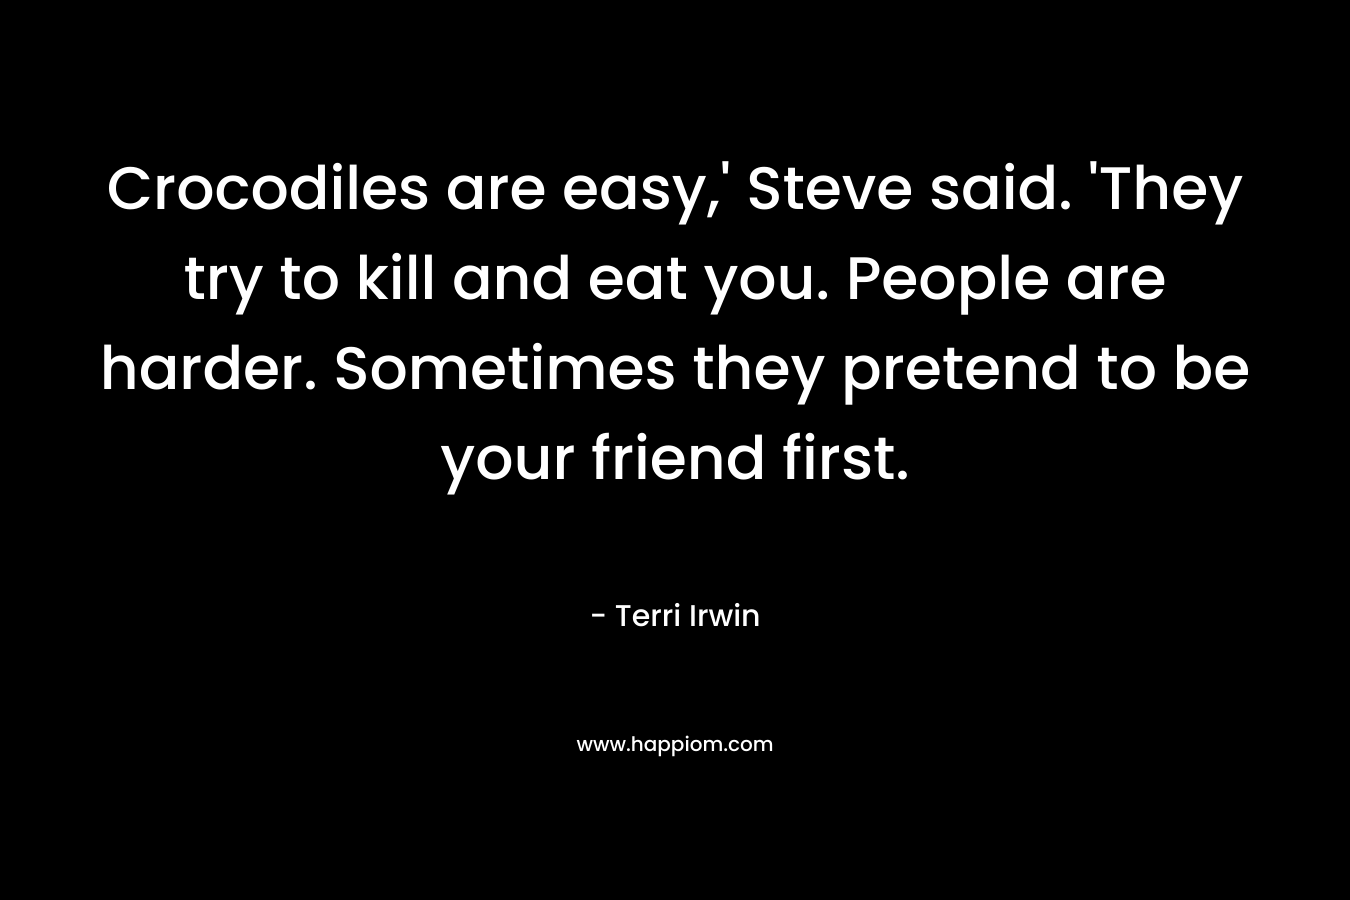 Crocodiles are easy,' Steve said. 'They try to kill and eat you. People are harder. Sometimes they pretend to be your friend first.